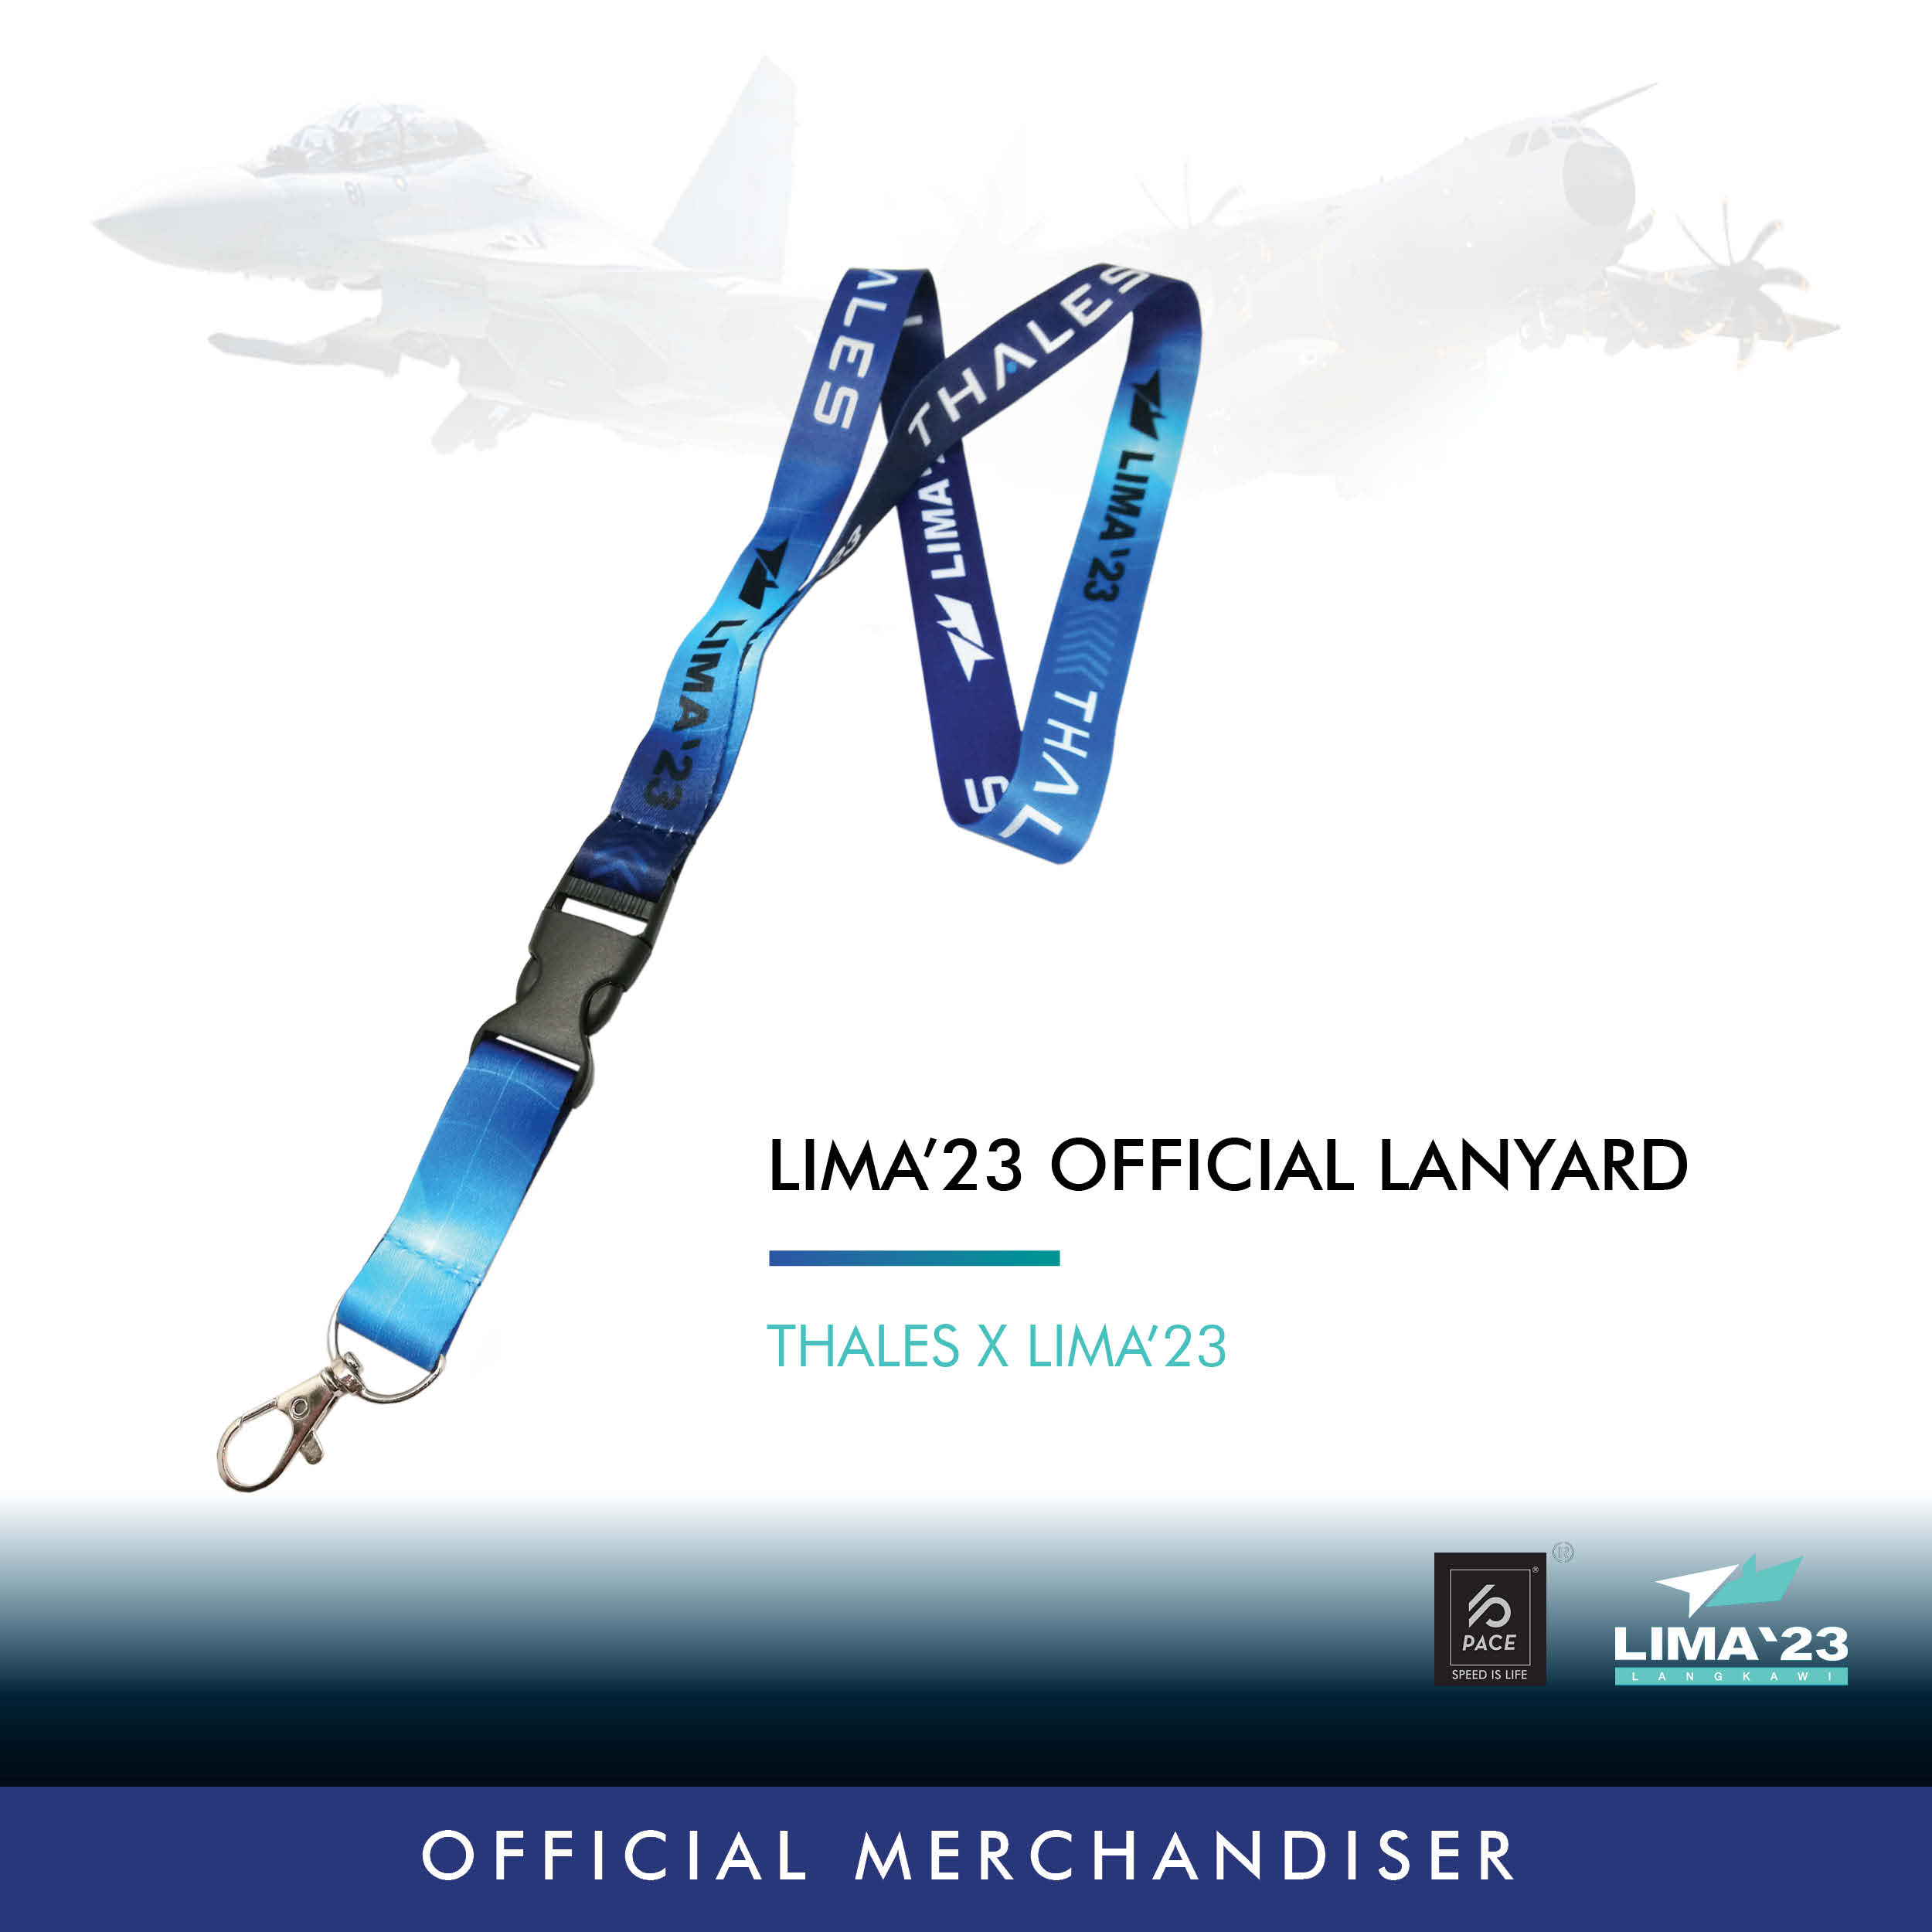 LIMA ’23 OFFICIAL LANYARD